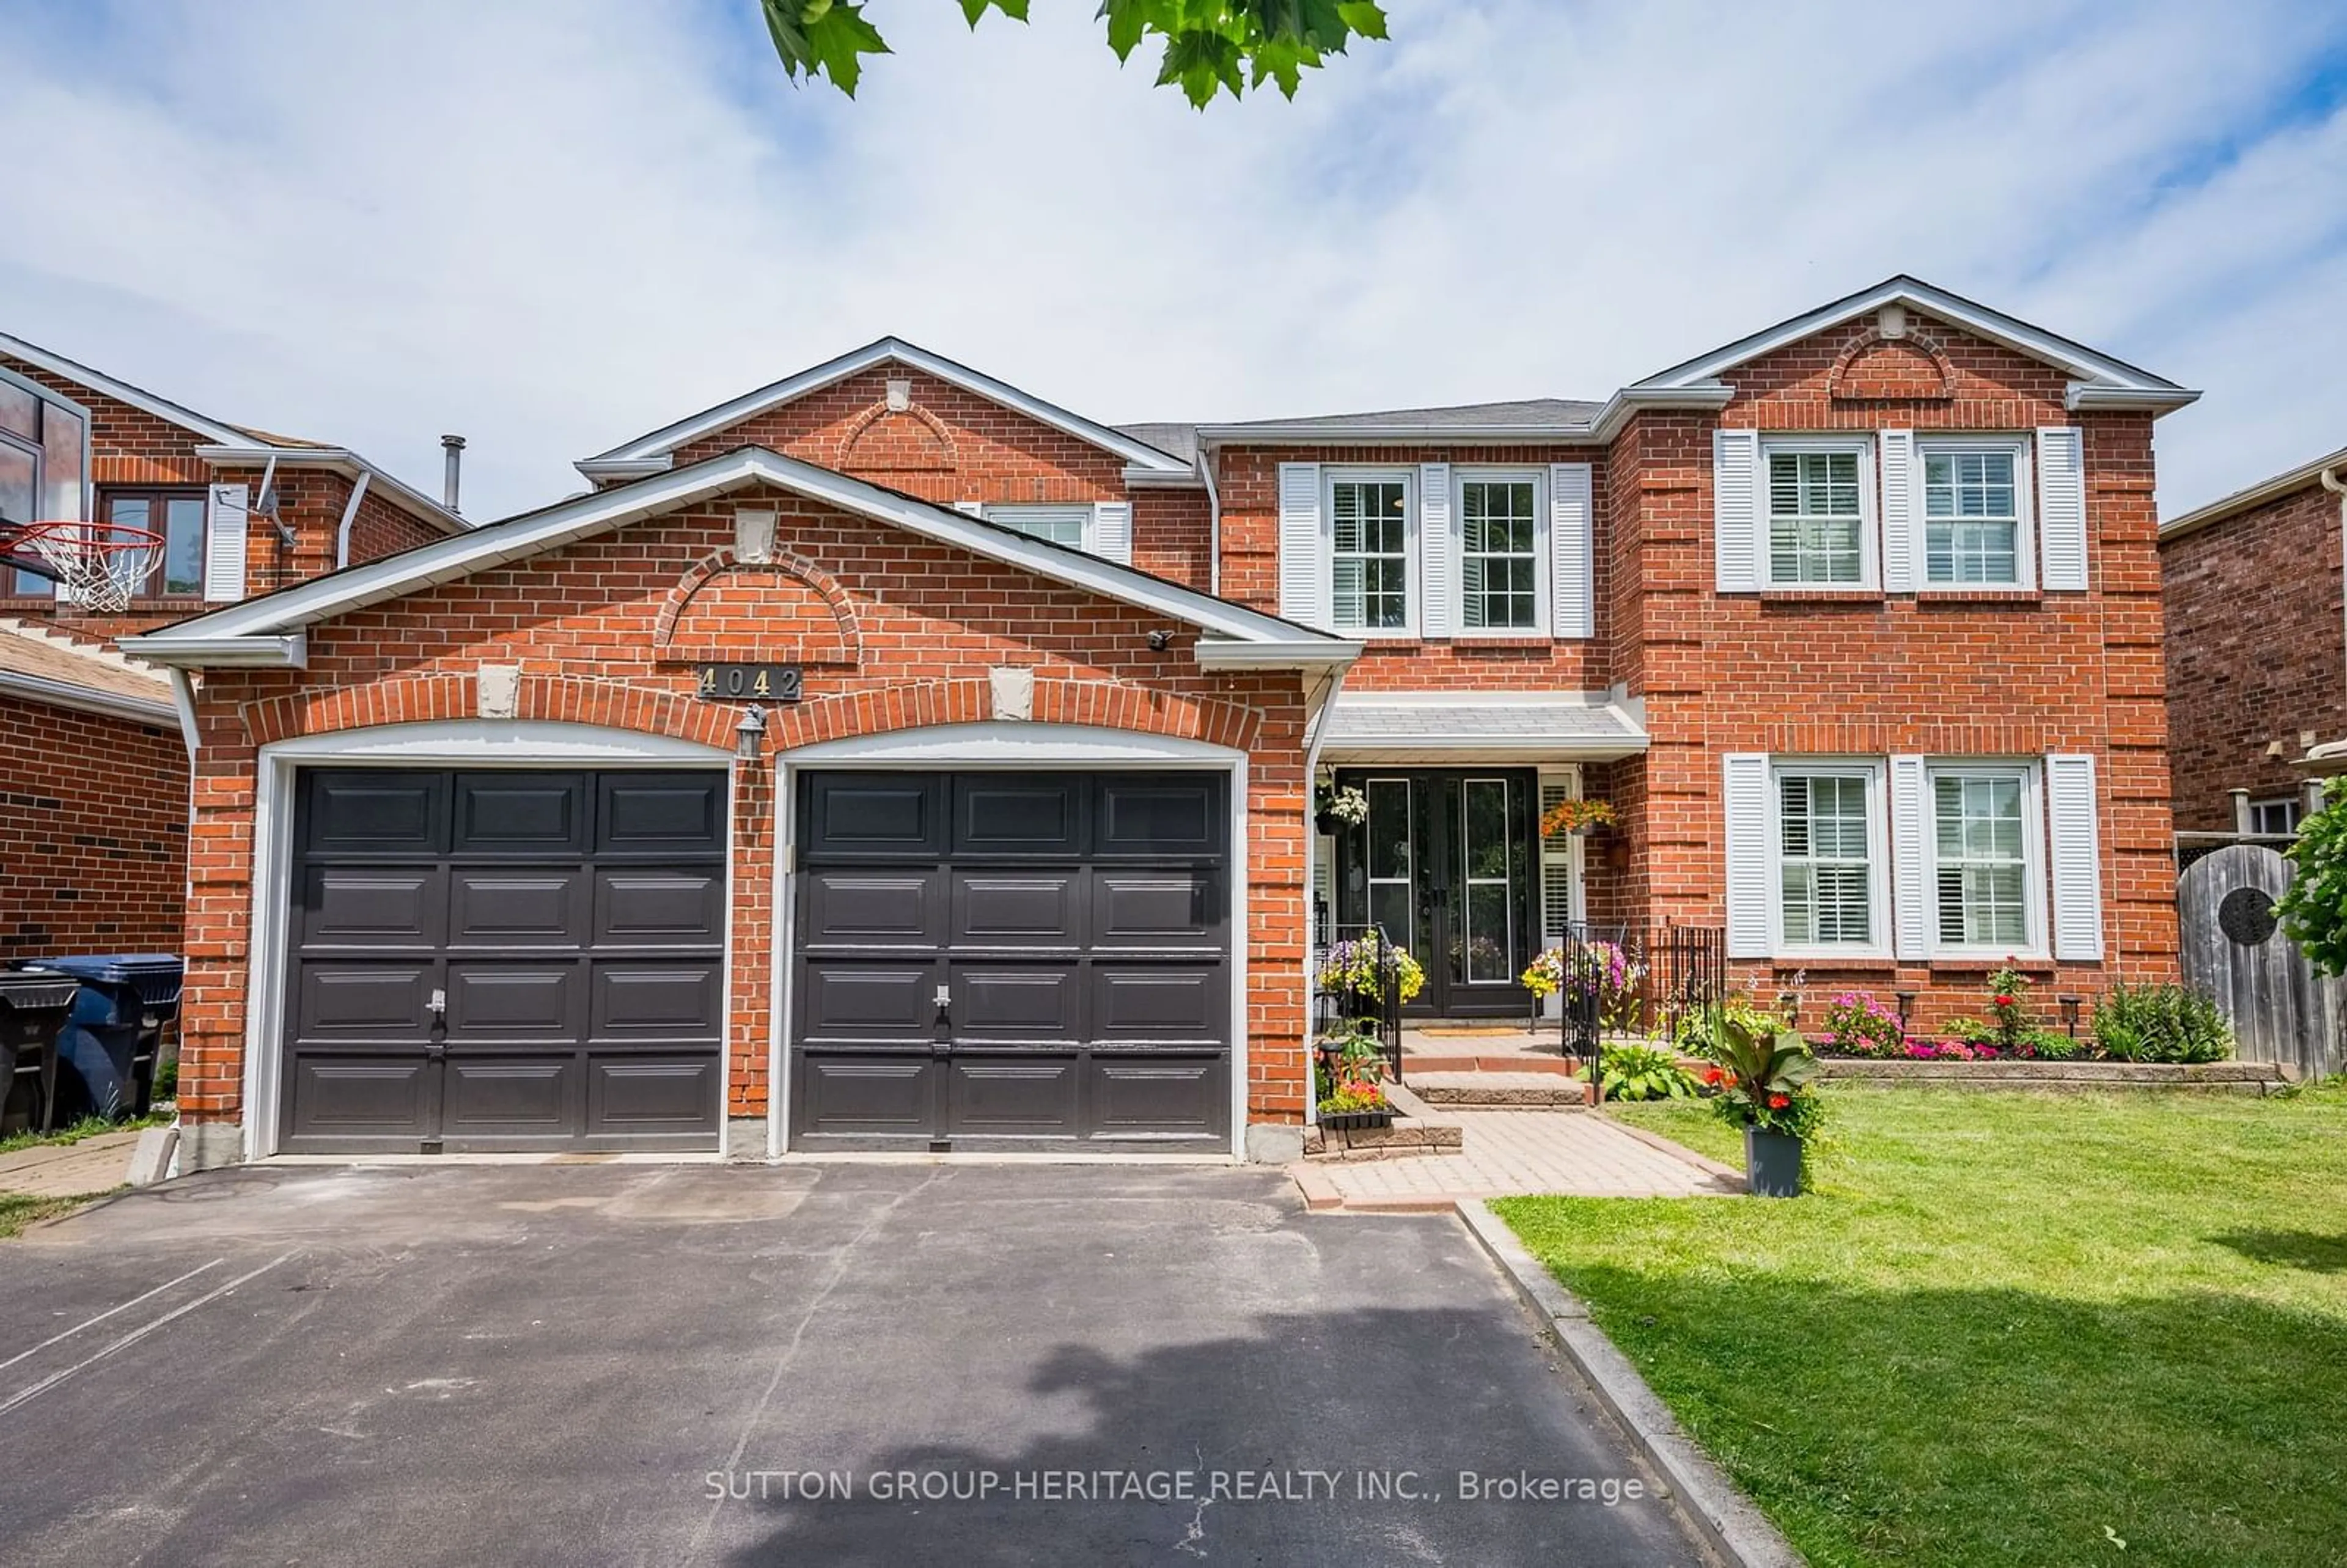 Home with brick exterior material for 4042 Ellesmere Rd, Toronto Ontario M1C 1H7